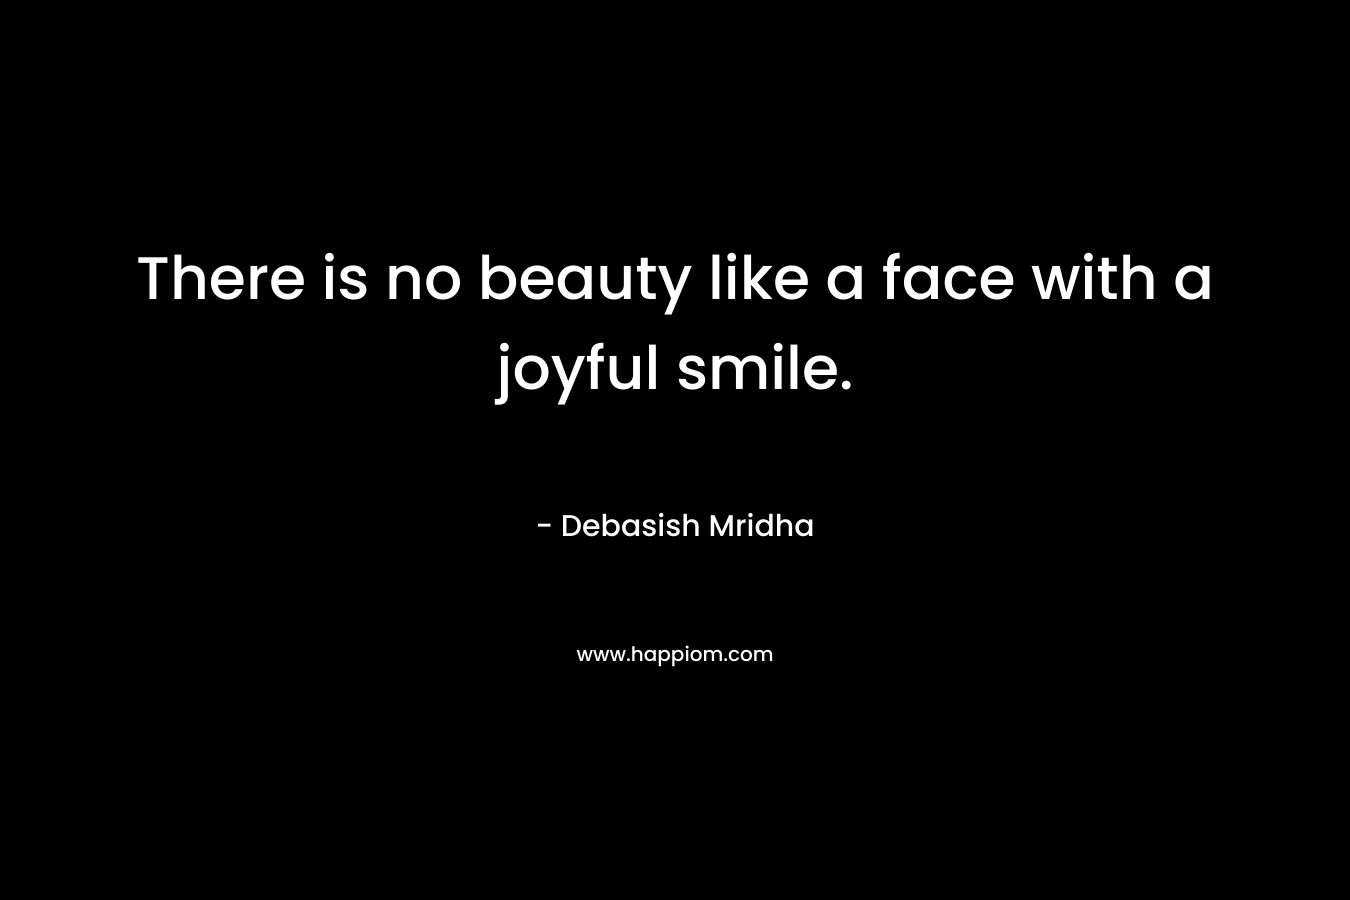 There is no beauty like a face with a joyful smile.